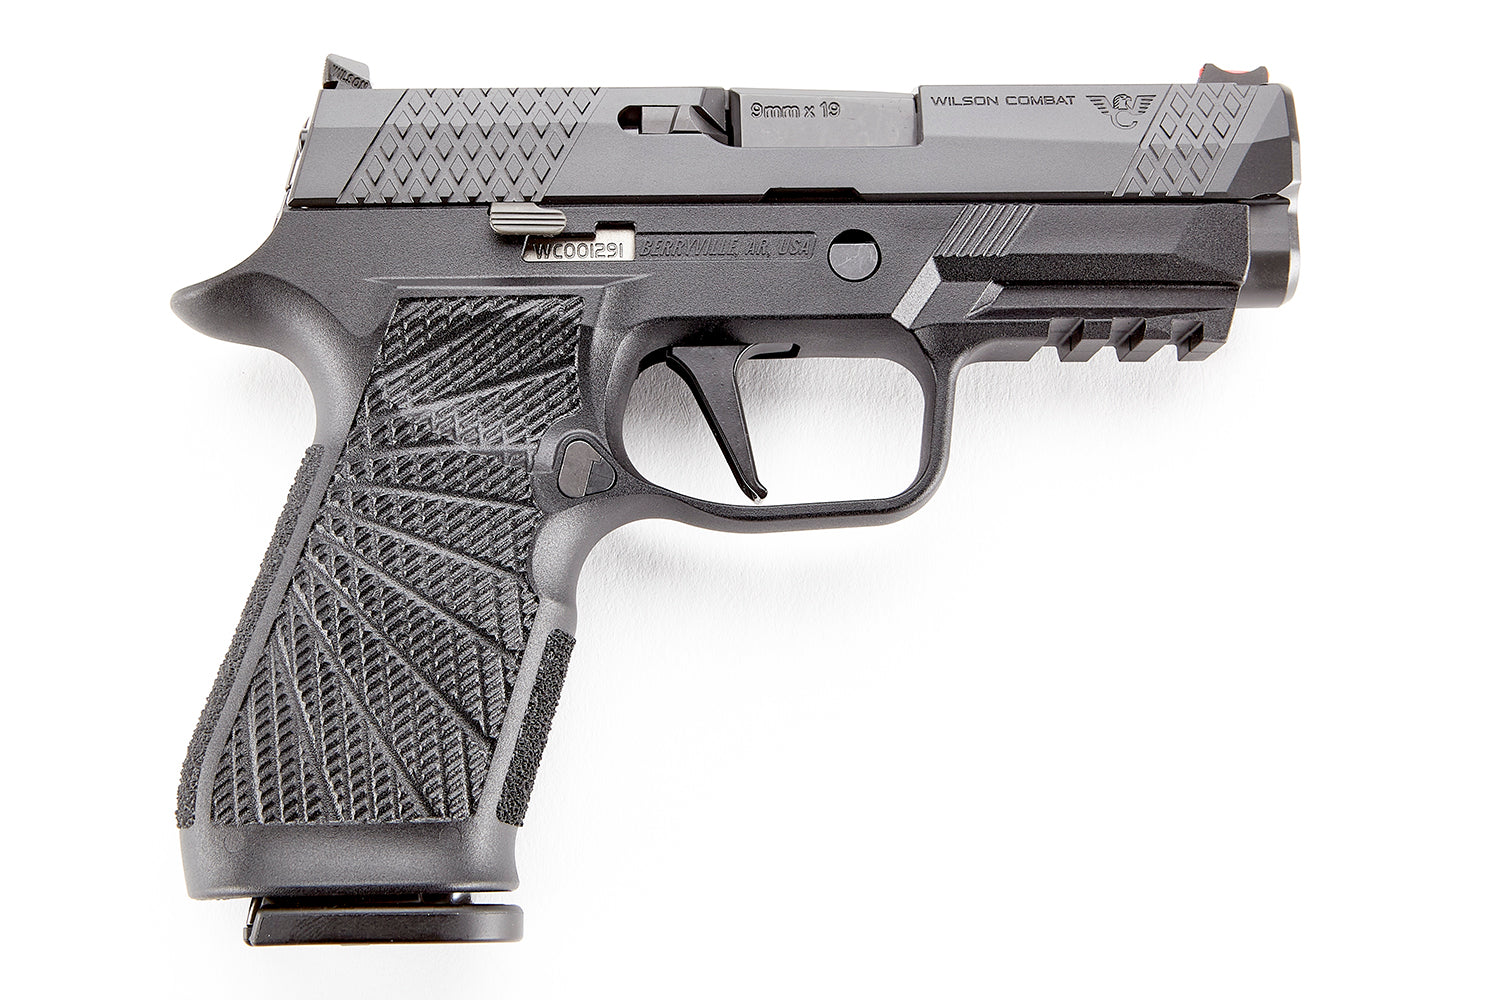 Wilson Combat Sig Sauer P320 Carry Review: Pros and cons of the Sig Sauer P320 Carry